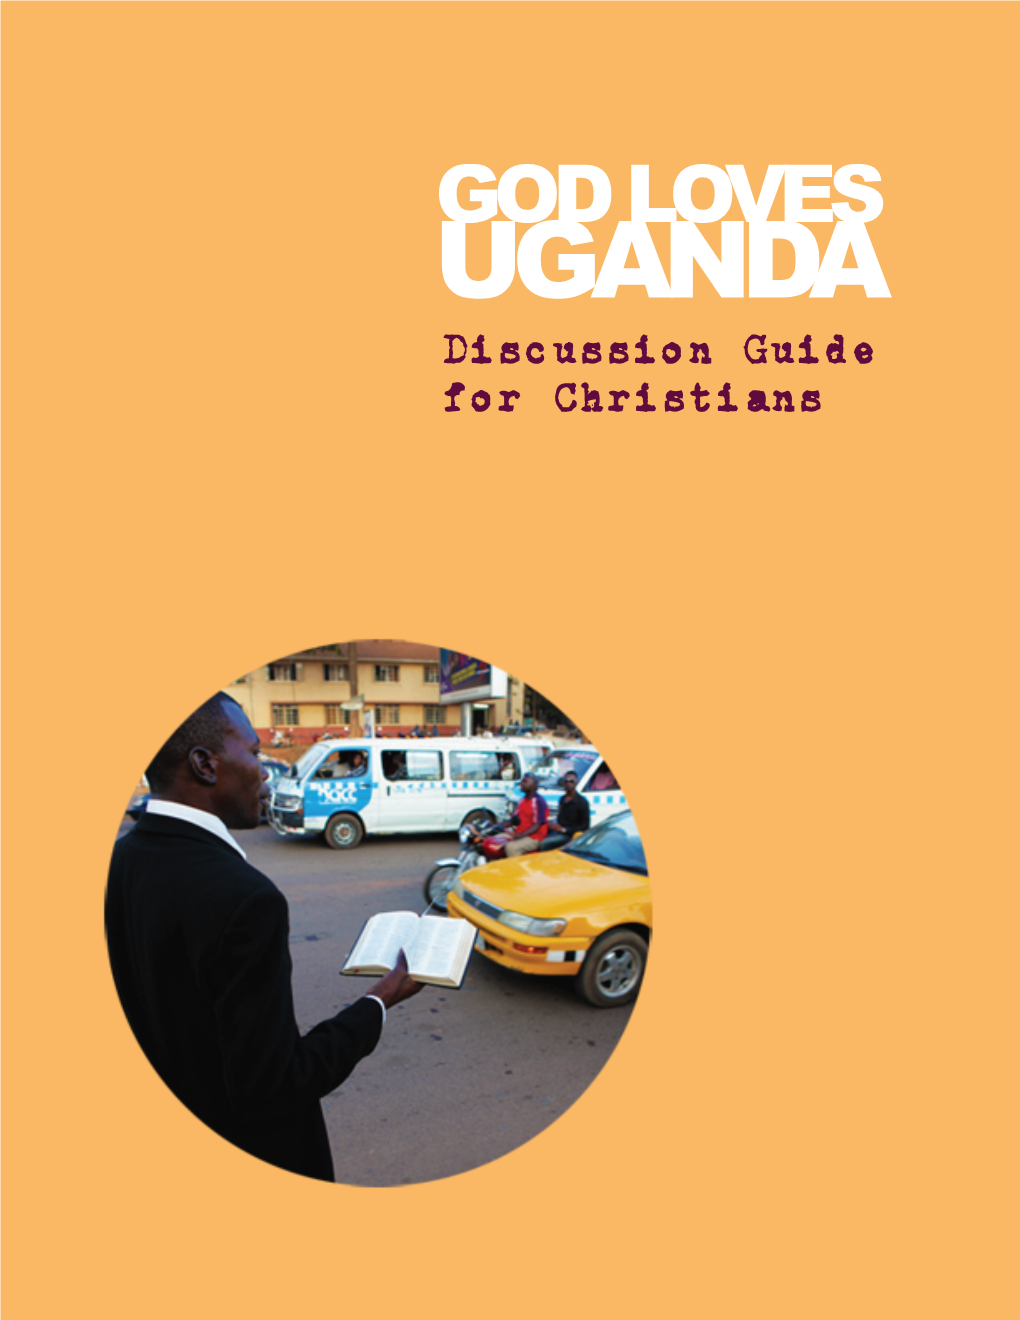 Discussion Guide for Christians God Loves Uganda - Discussion Guide for Christians